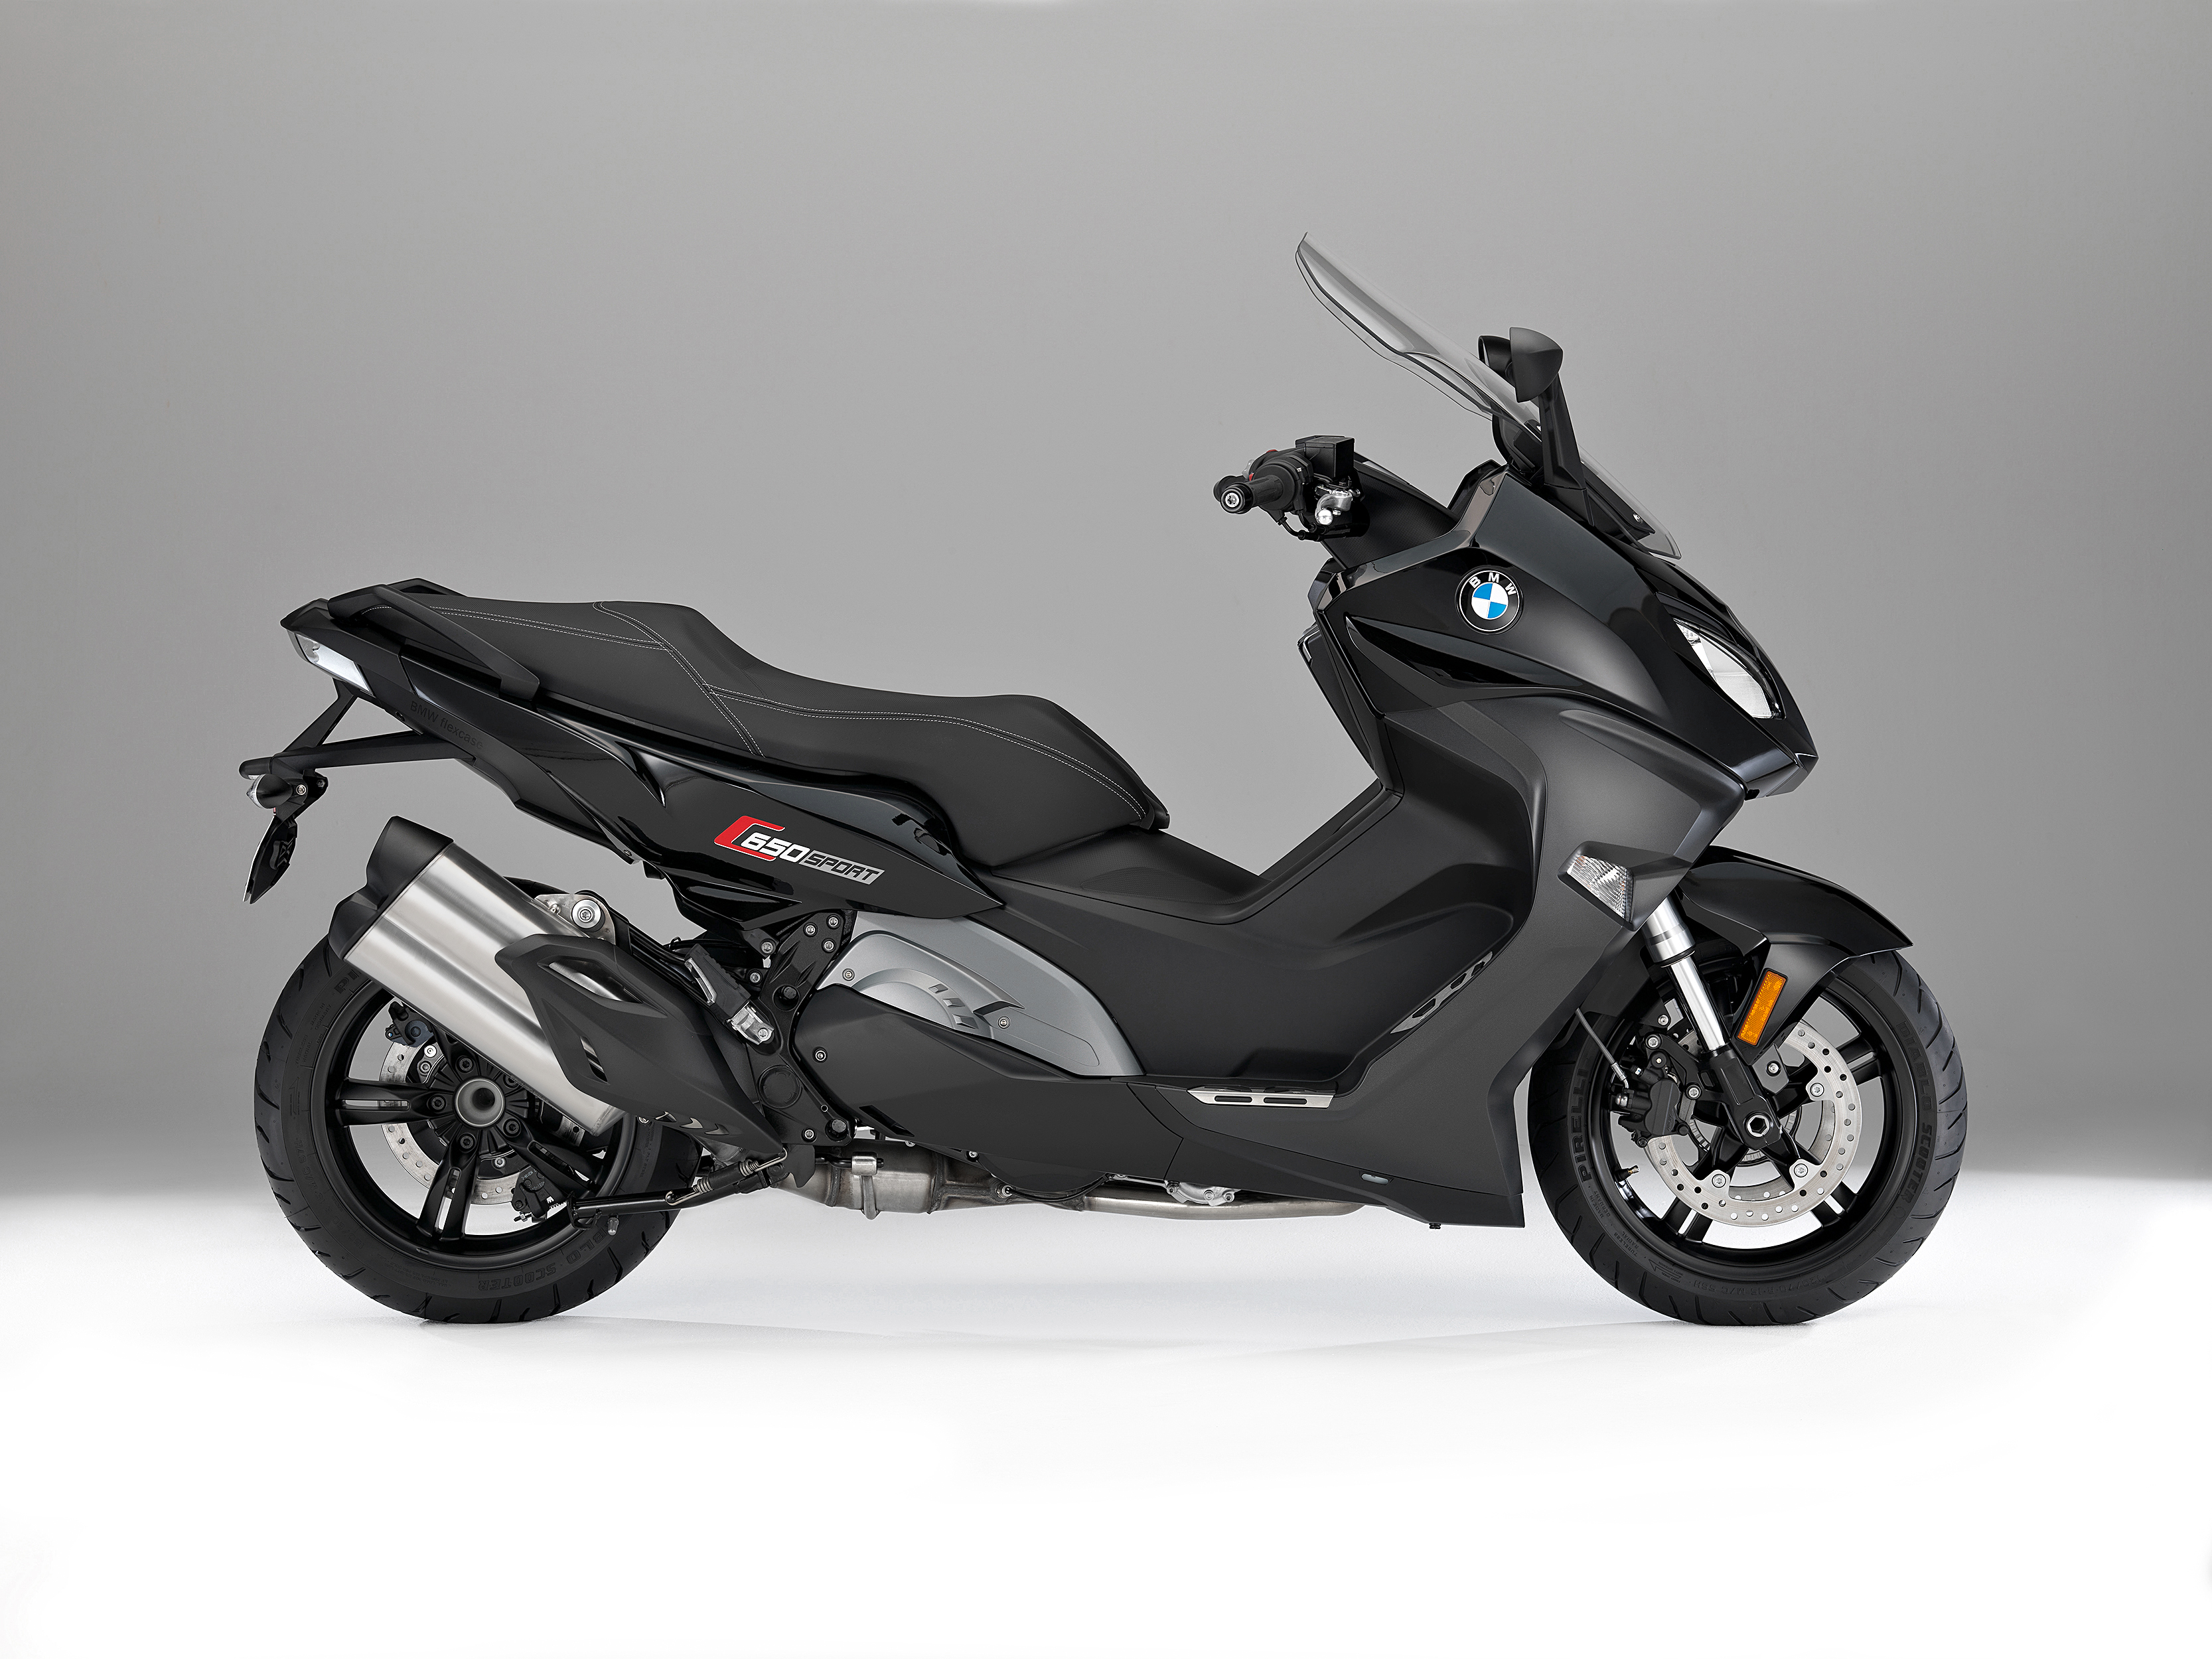 Updates for BMW C 650 Sport and C 650 GT